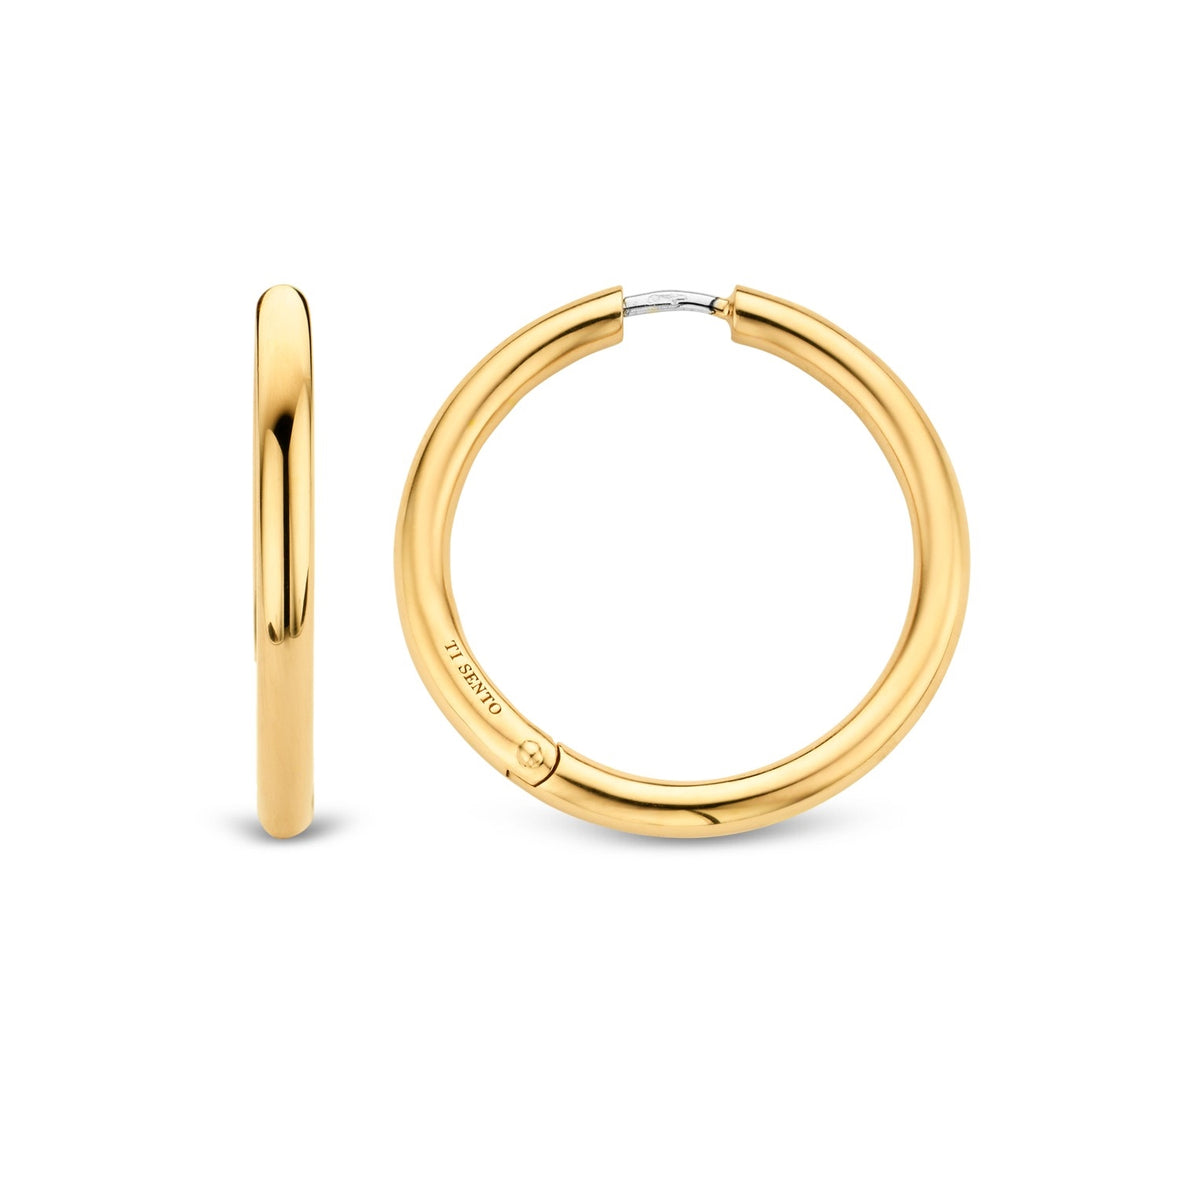 TI SENTO Sterling Silver Gold Tone Hoop Earring